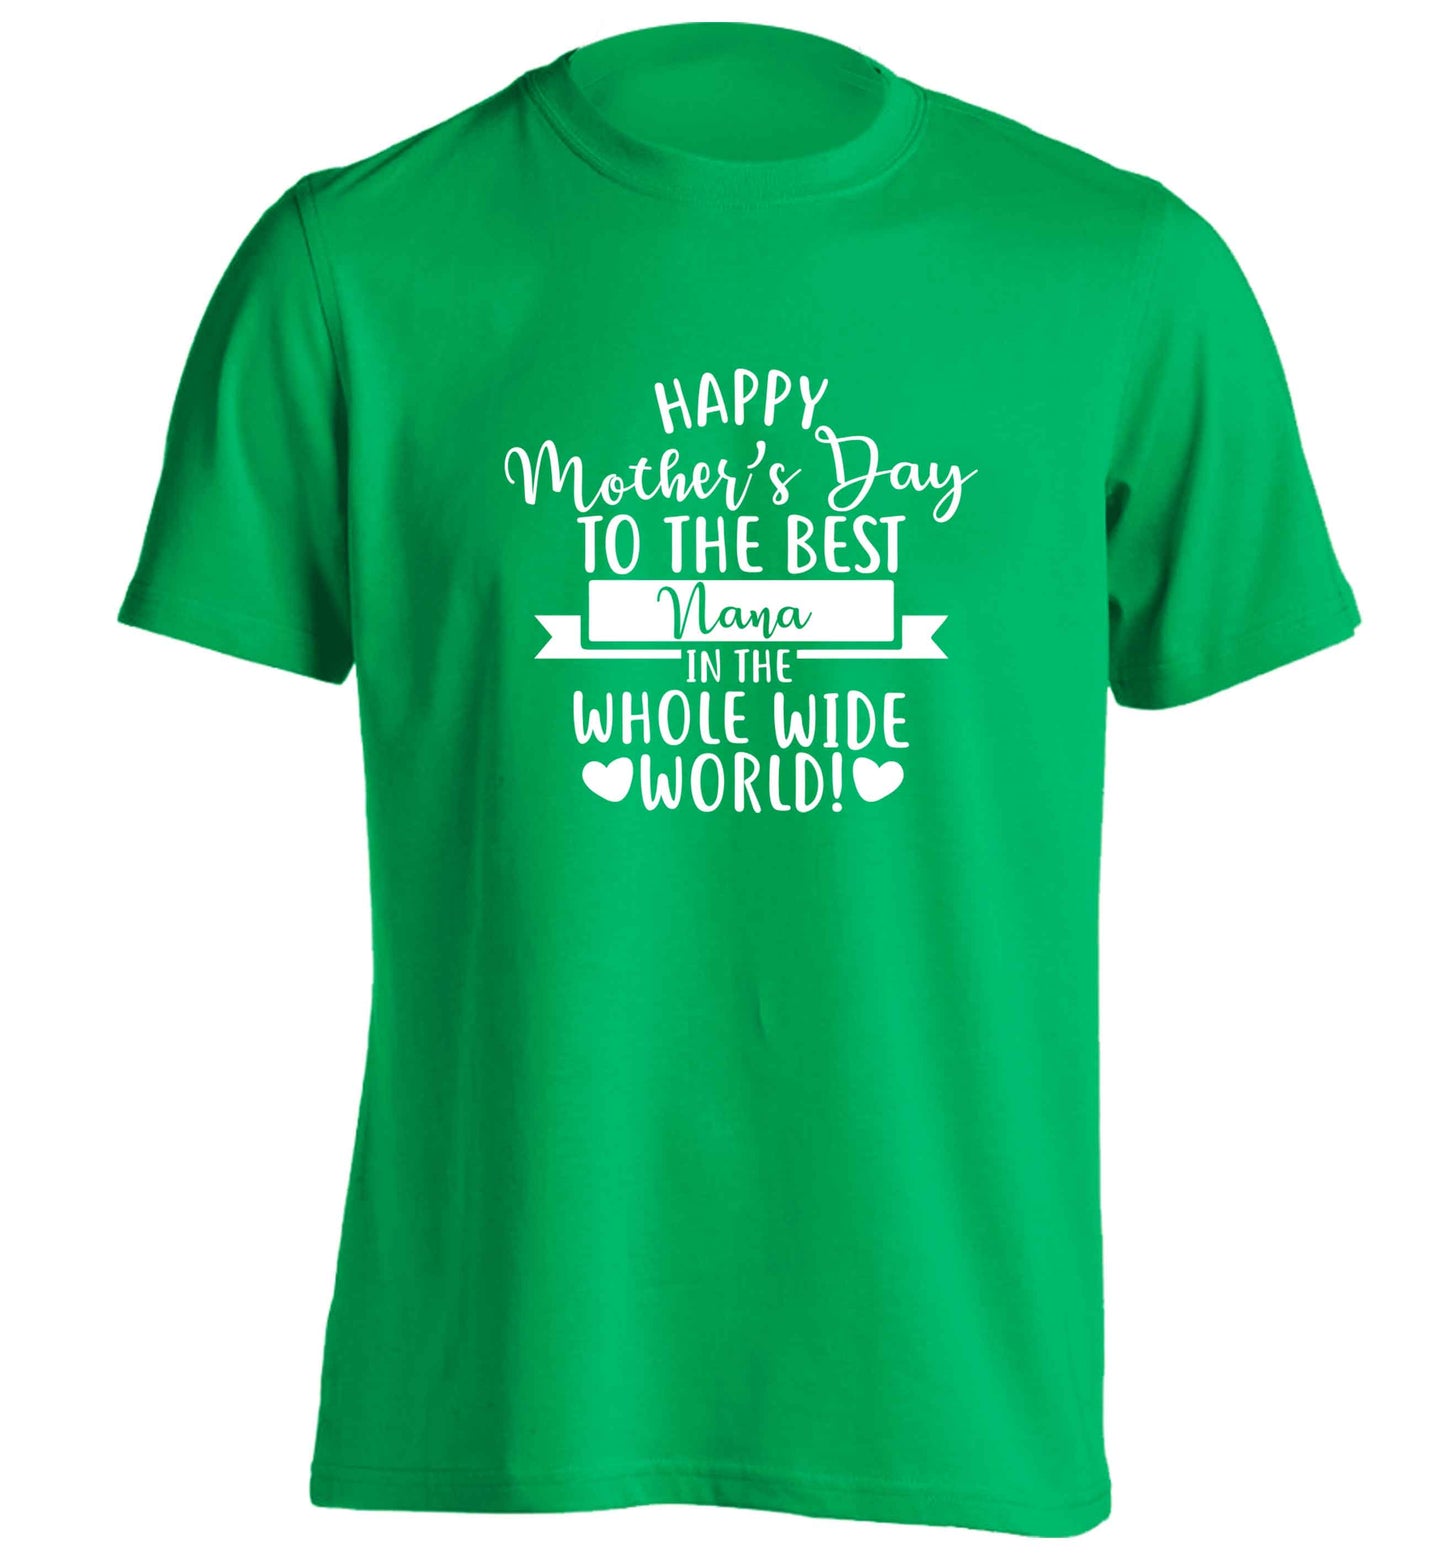 Happy mother's day to the best nana in the world adults unisex green Tshirt 2XL